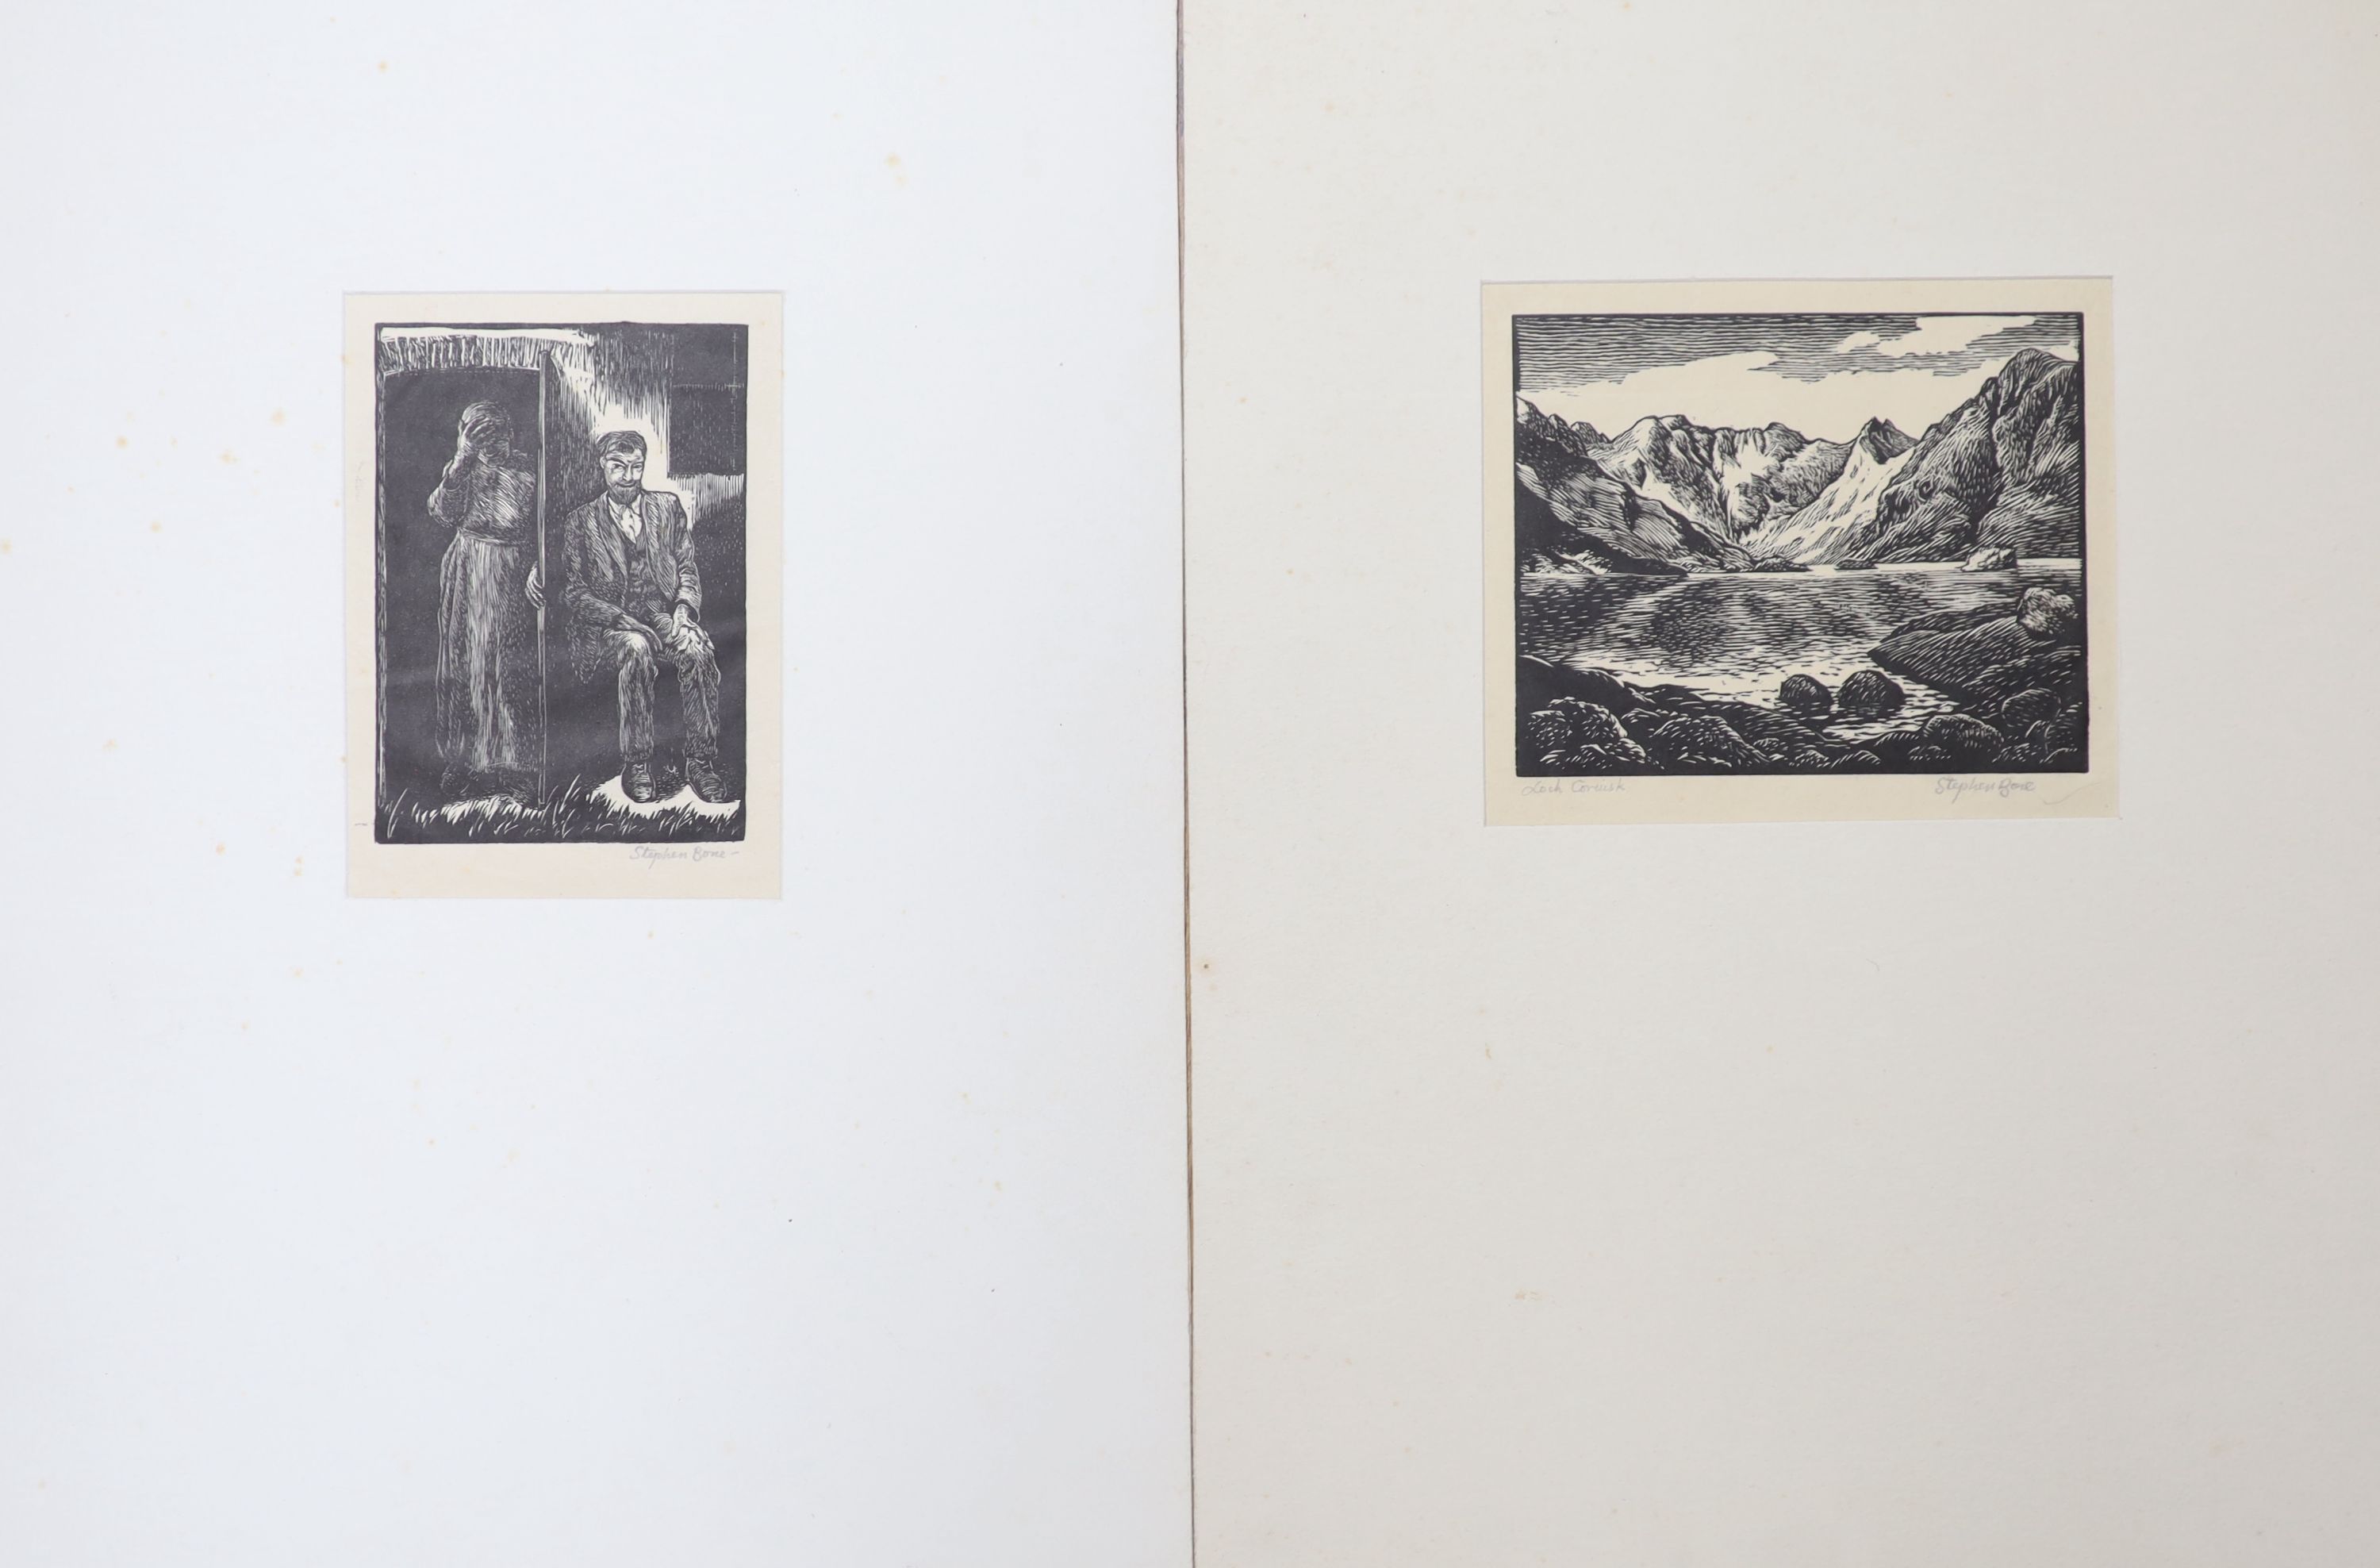 Stephen Bone, N.E.A.C., (1904-1958), two woodcut prints: Priest in confession; and 'Loch Coruisk' Isle of Skye, Scottish Highlands, signed in pencil, 11.5 x 8cm and 10 x 12.5cm, both unframed